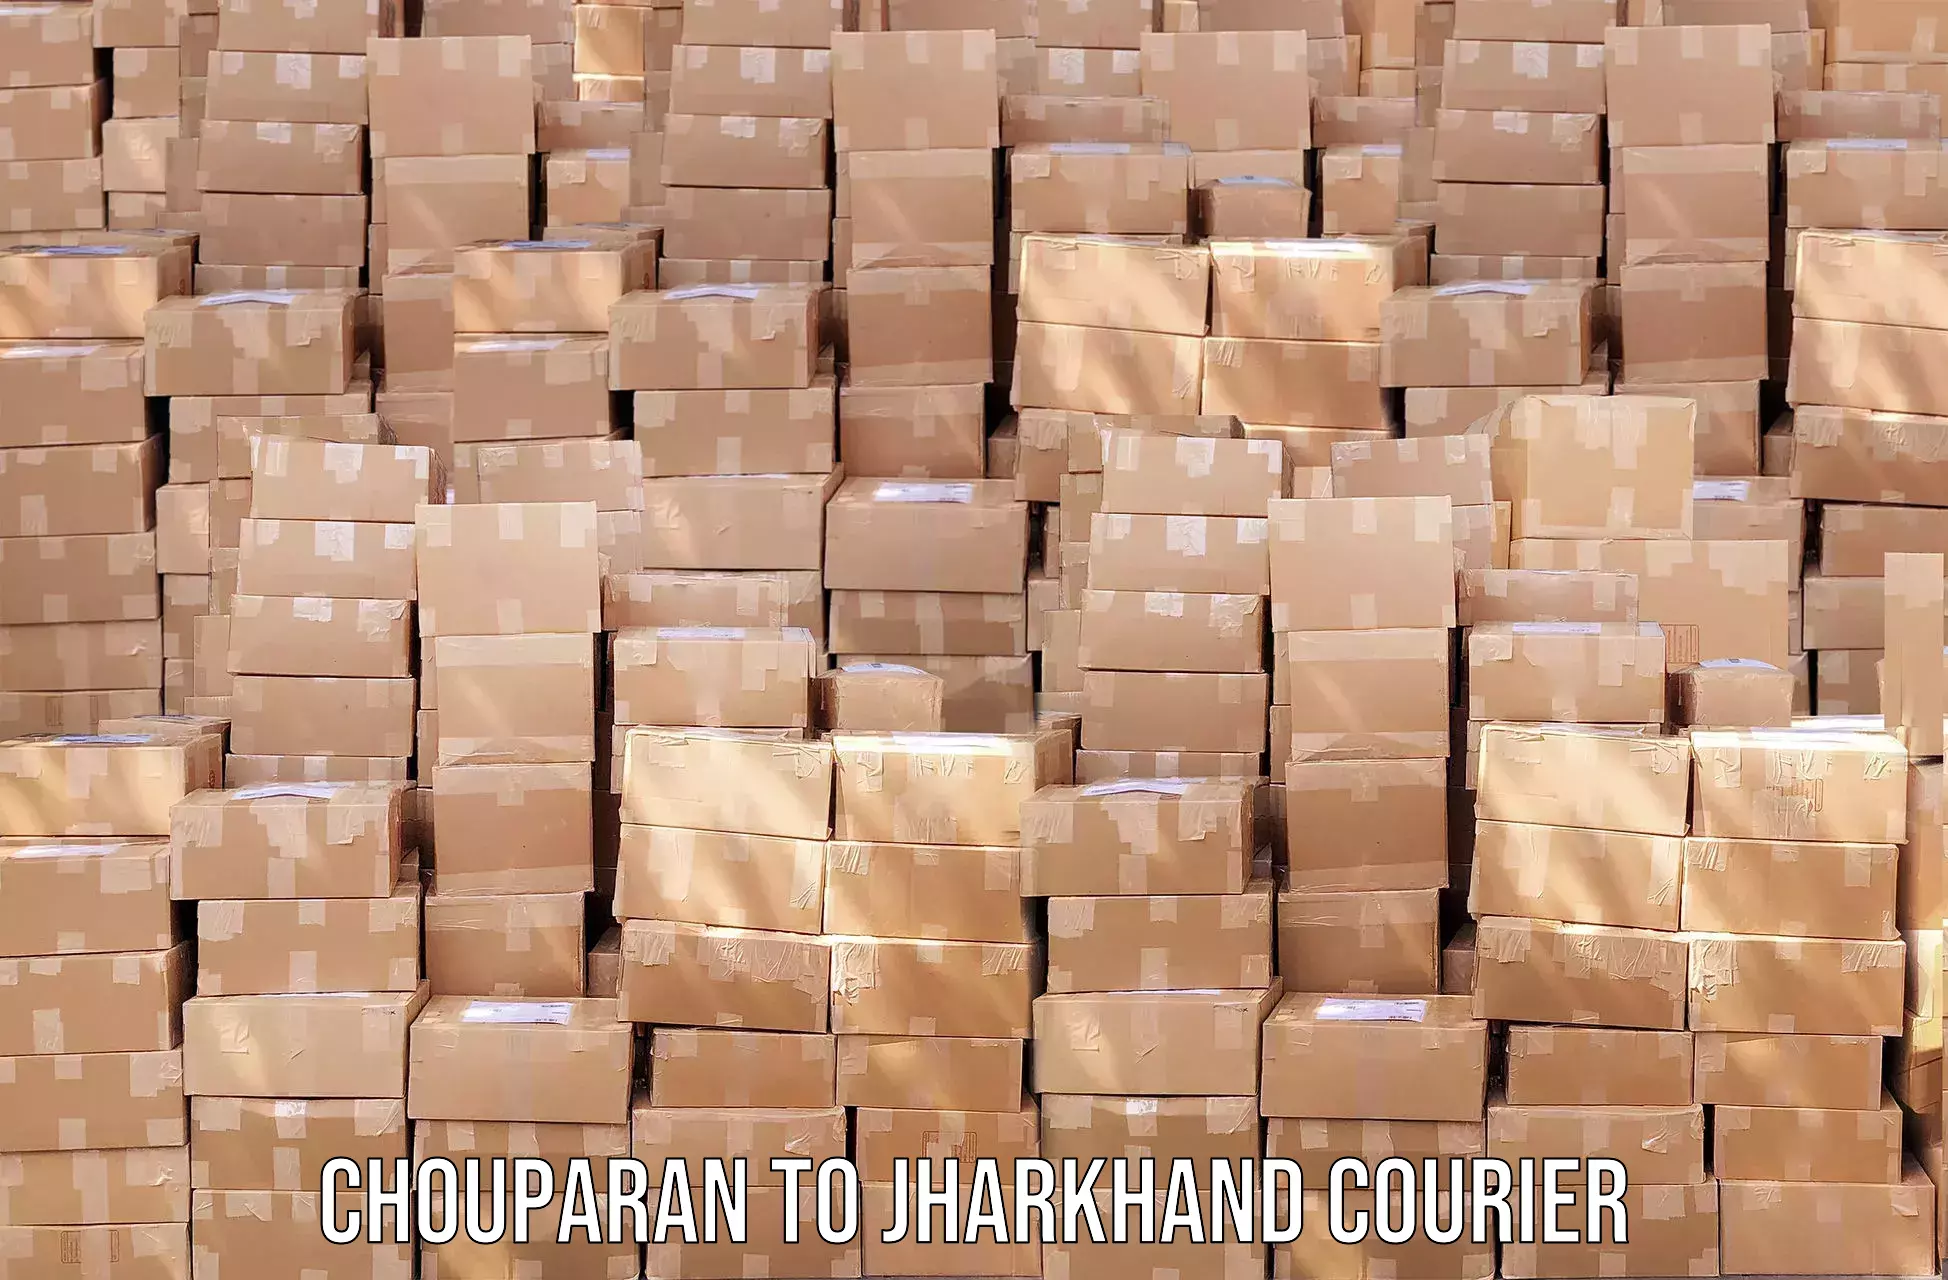 Global courier networks Chouparan to Dhalbhumgarh